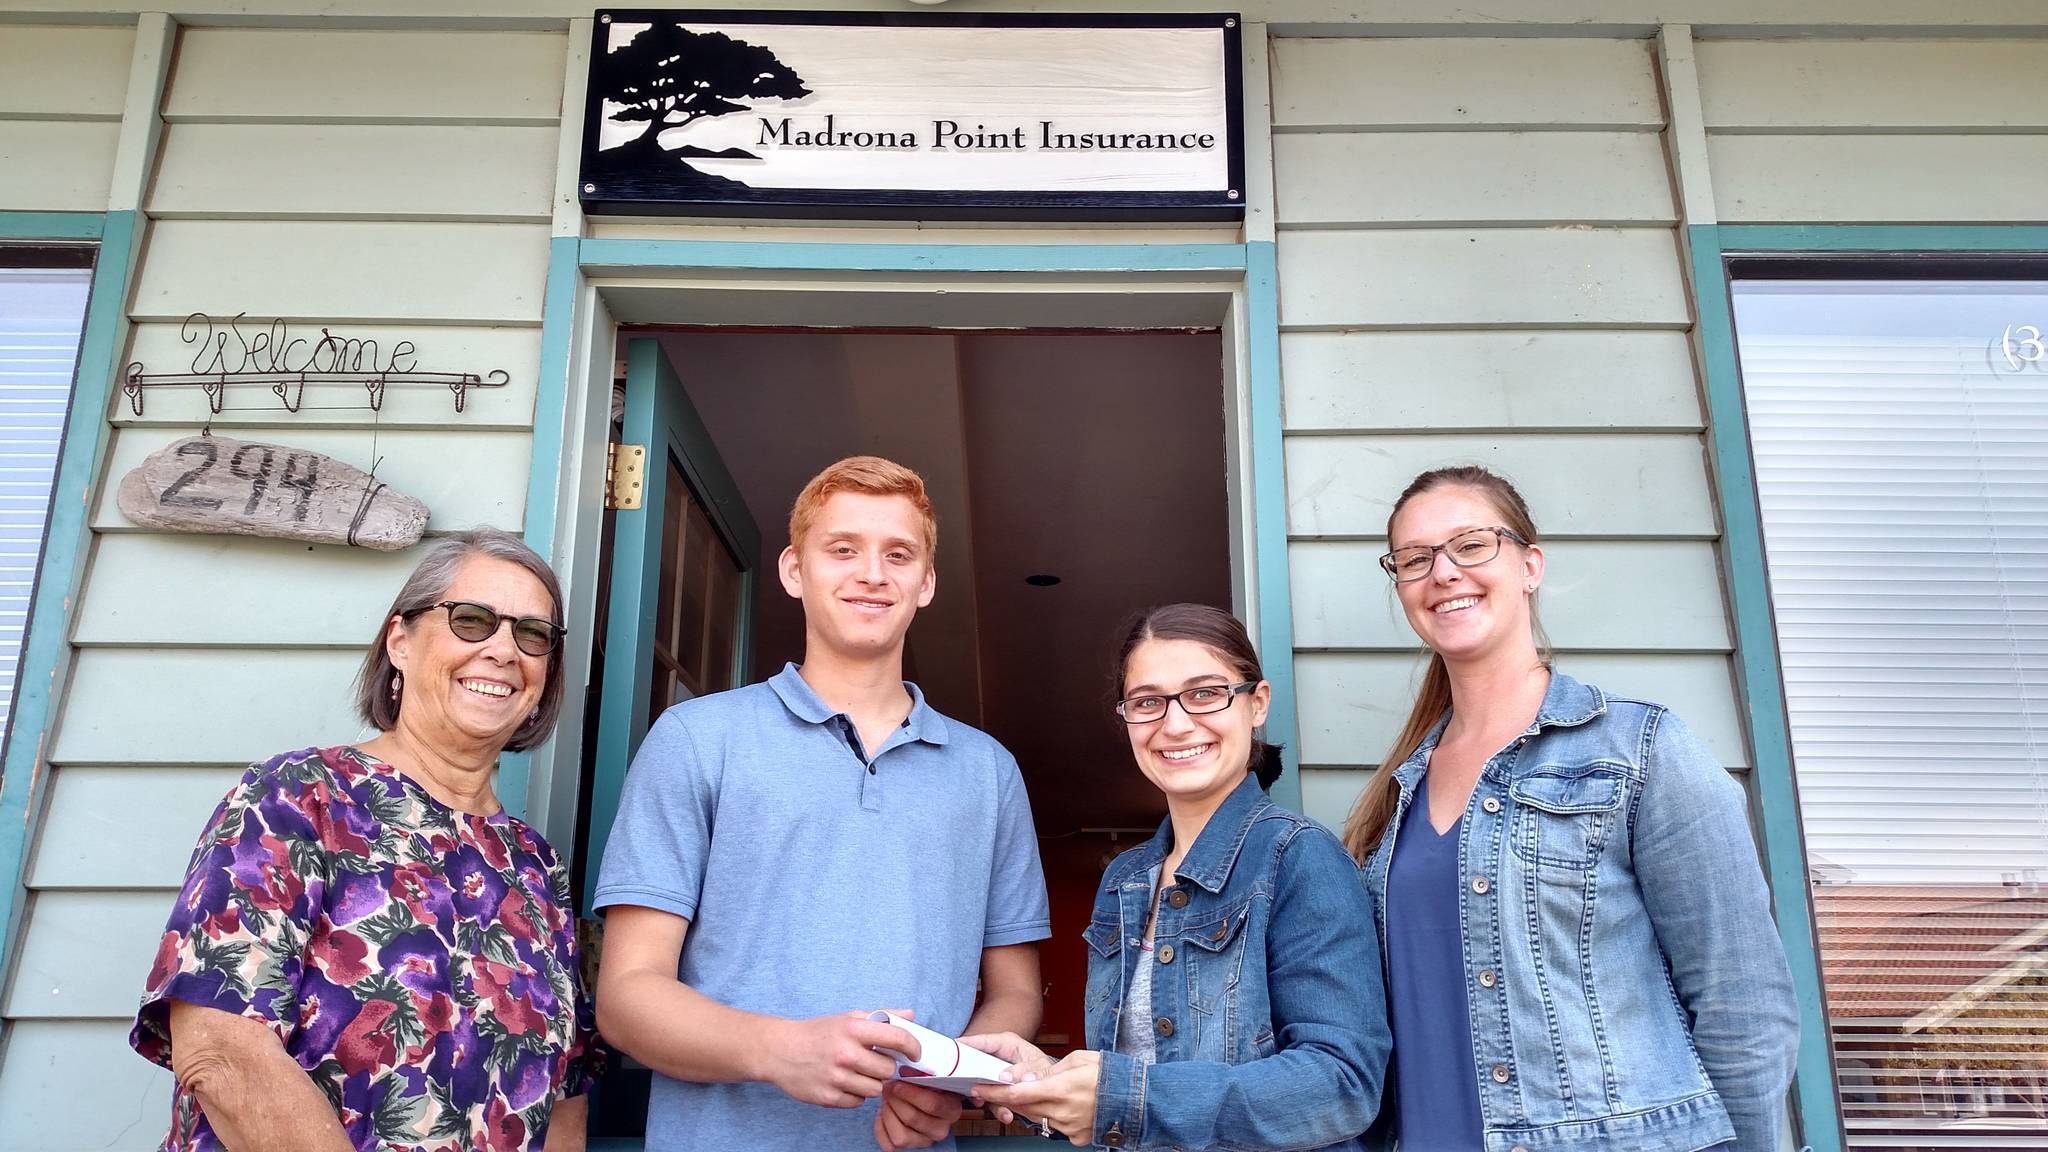 Ethan White with the staff of Madrona Point Insurance, left to right: Judi Madan, Kami Griffin and Alexis Beckley.&lt;h2&gt;                                &lt;/h2&gt;